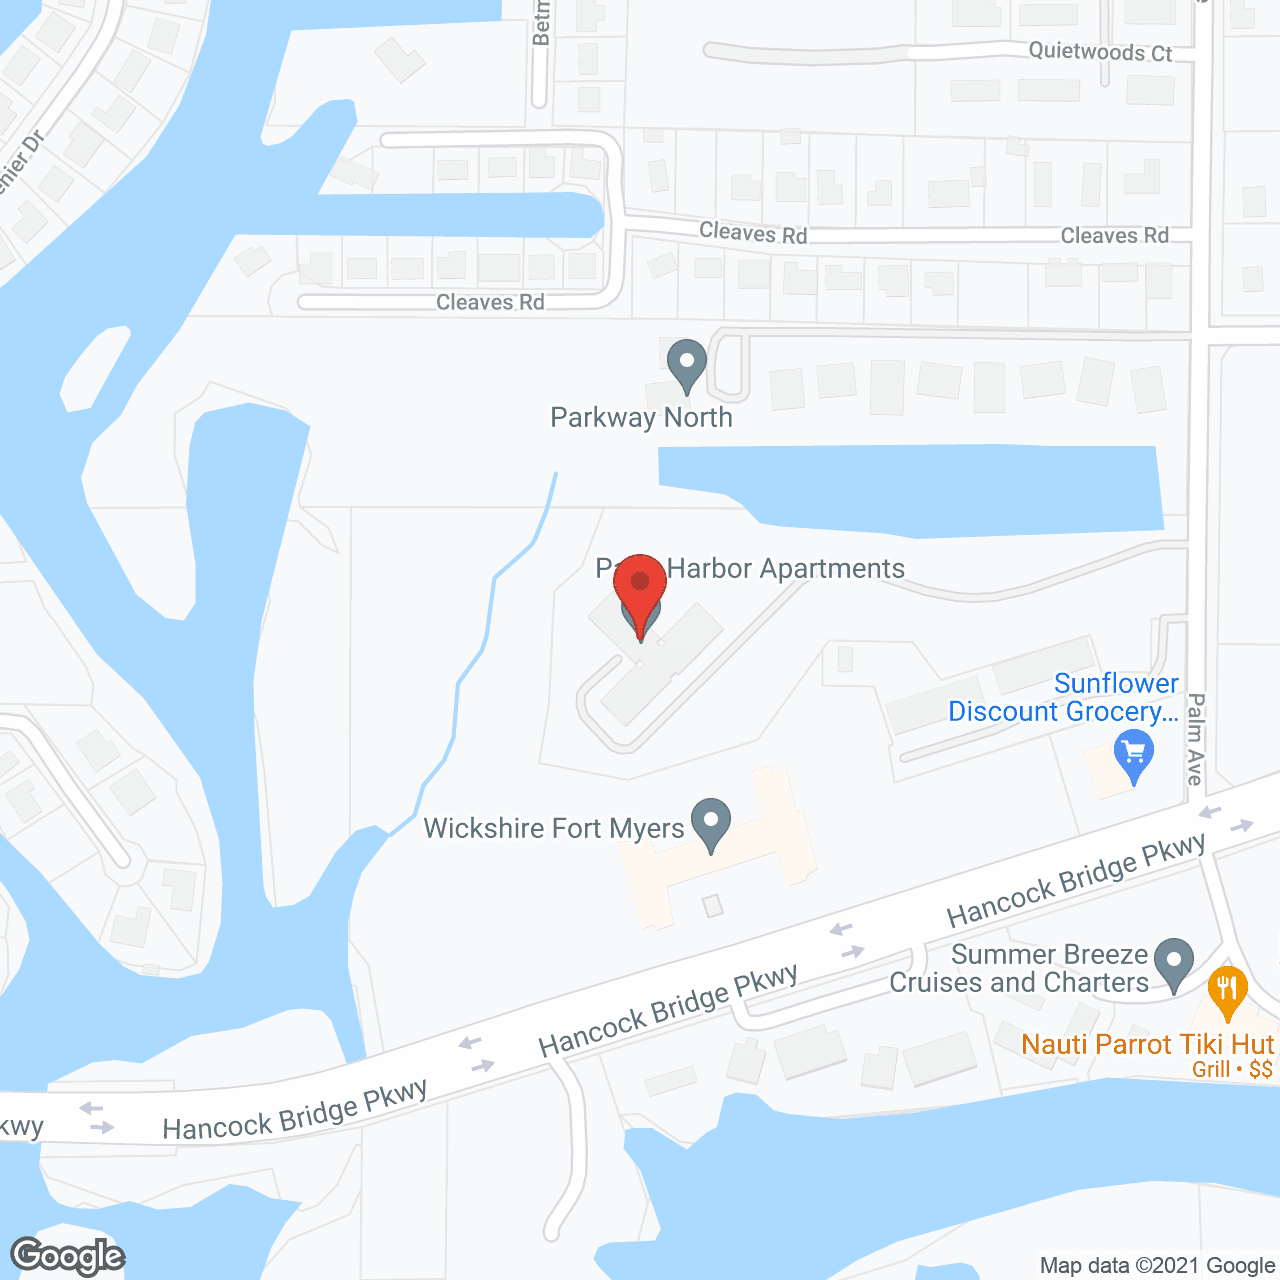 Palm Harbor Apartments in google map